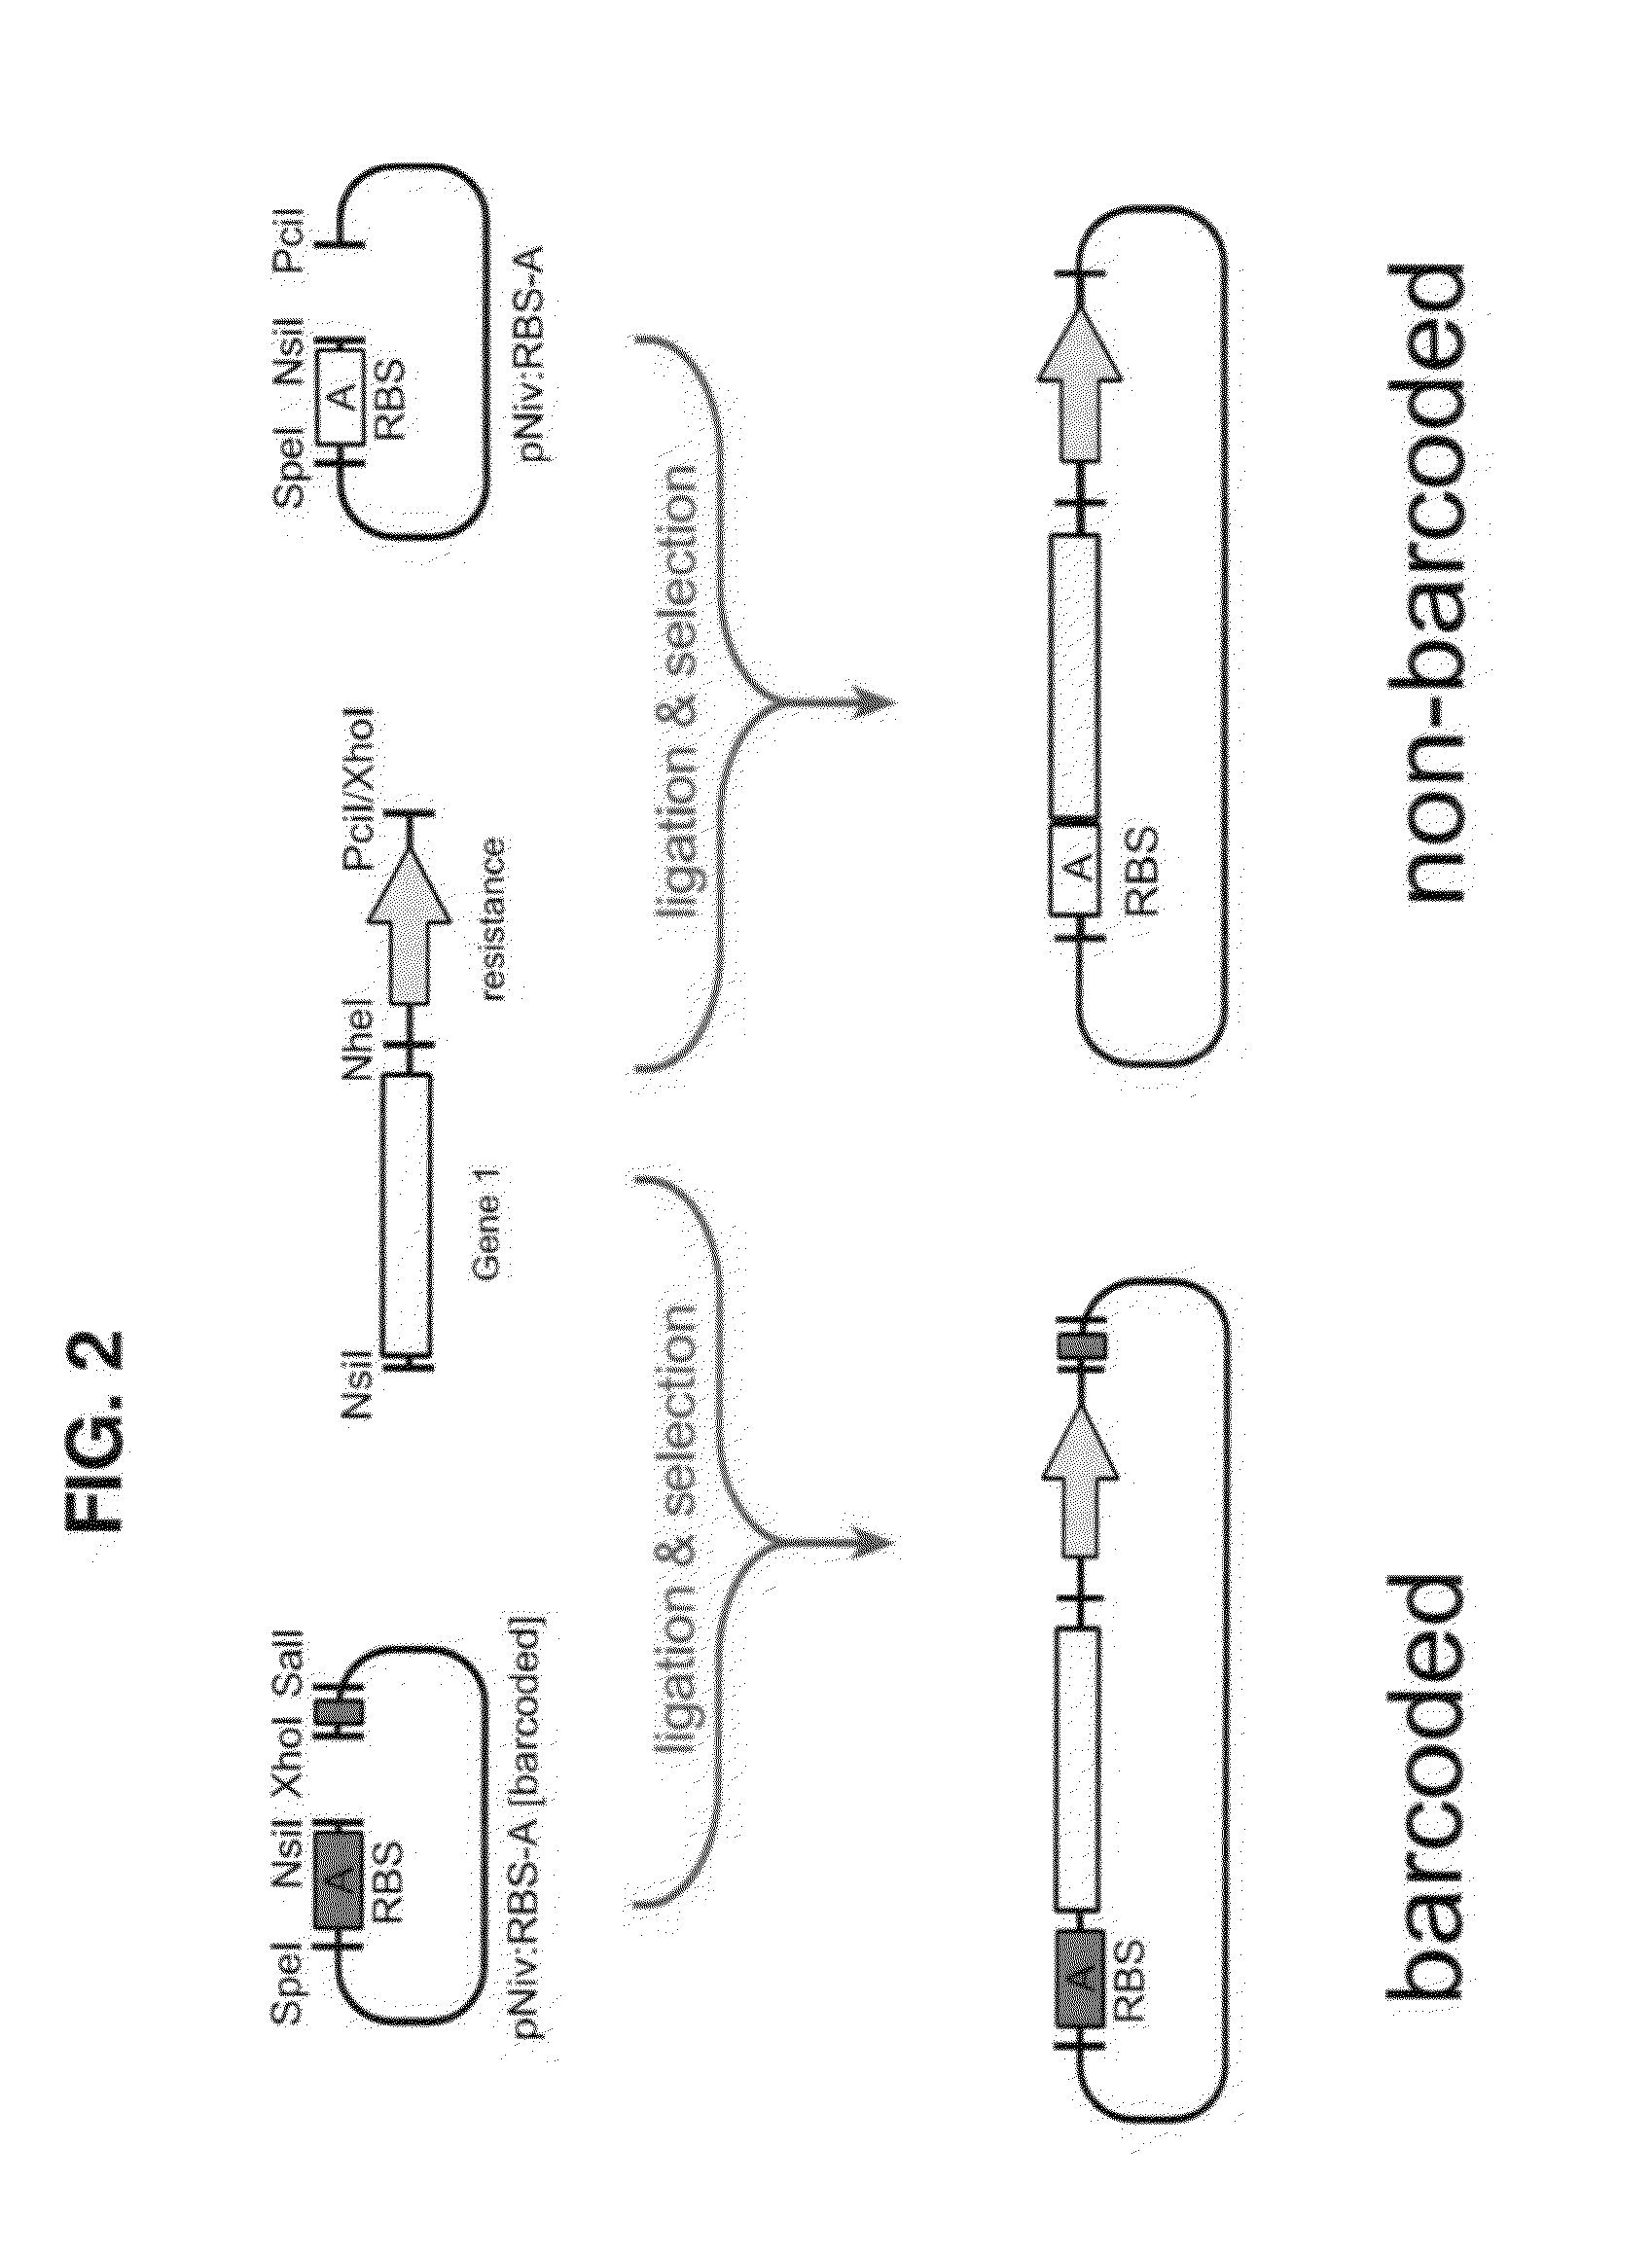 Methods of production of products of metabolic pathways